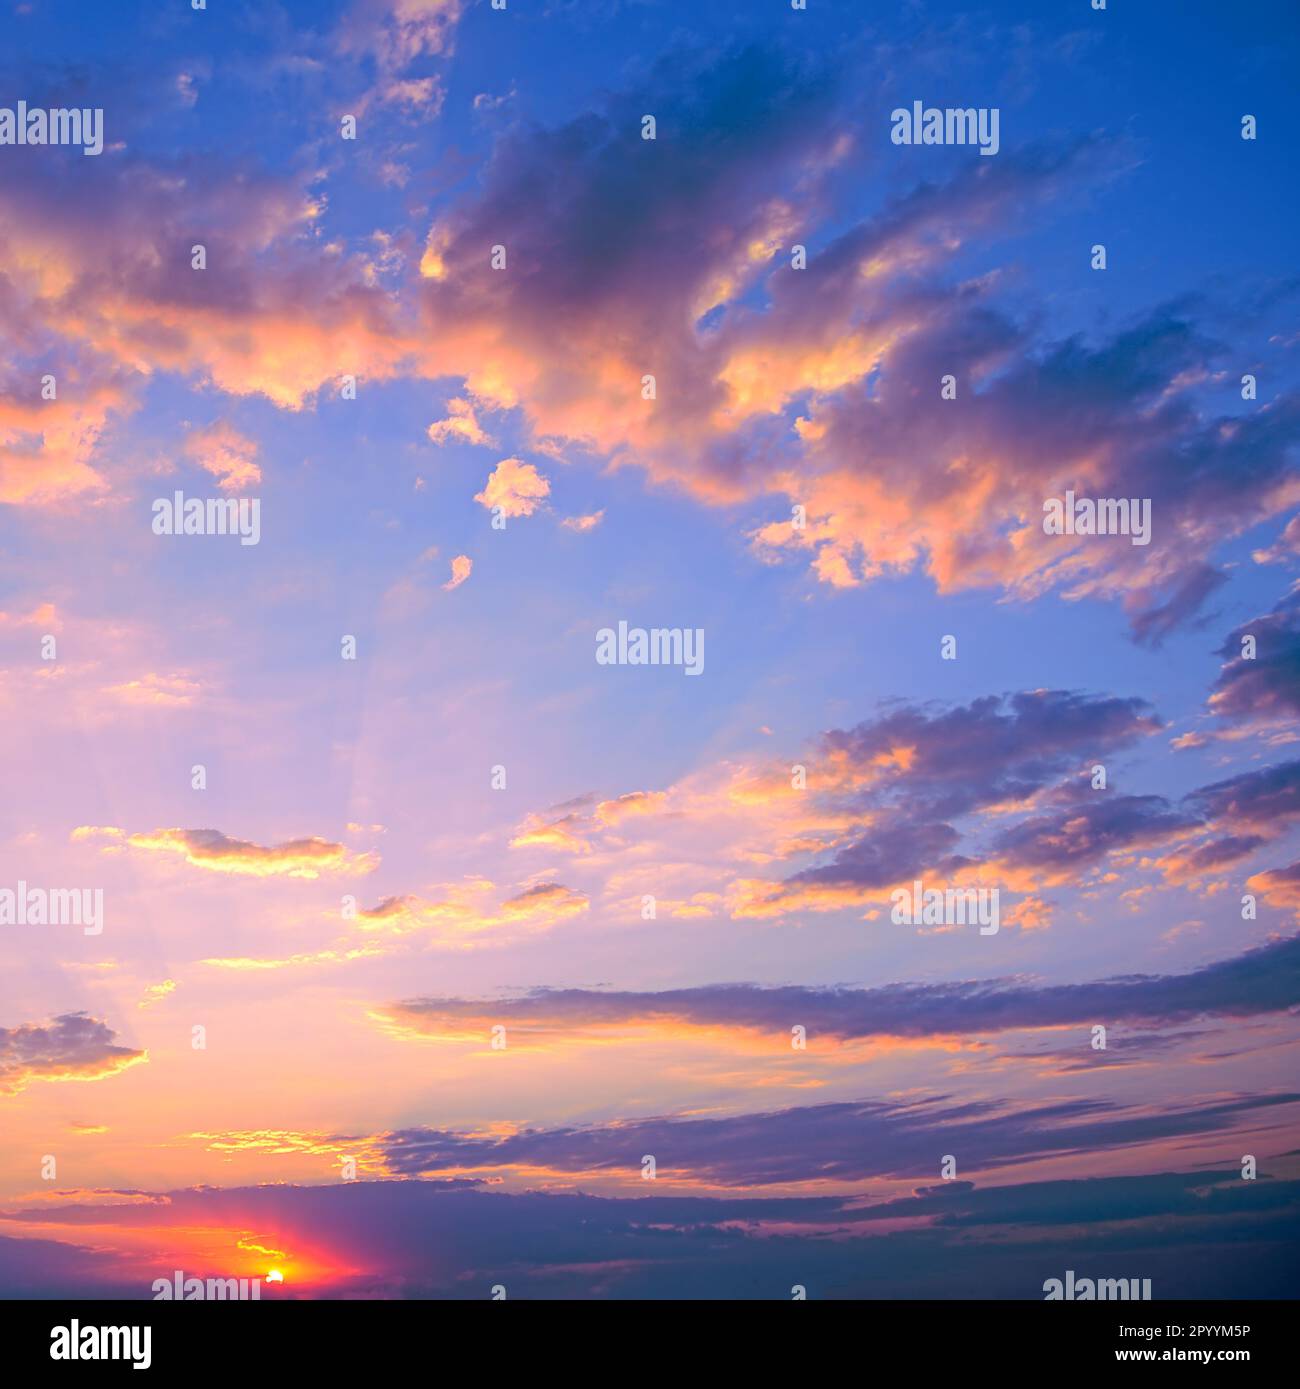 Fantastic pink sunset against blue sky with fluffy white clouds. Stock Photo